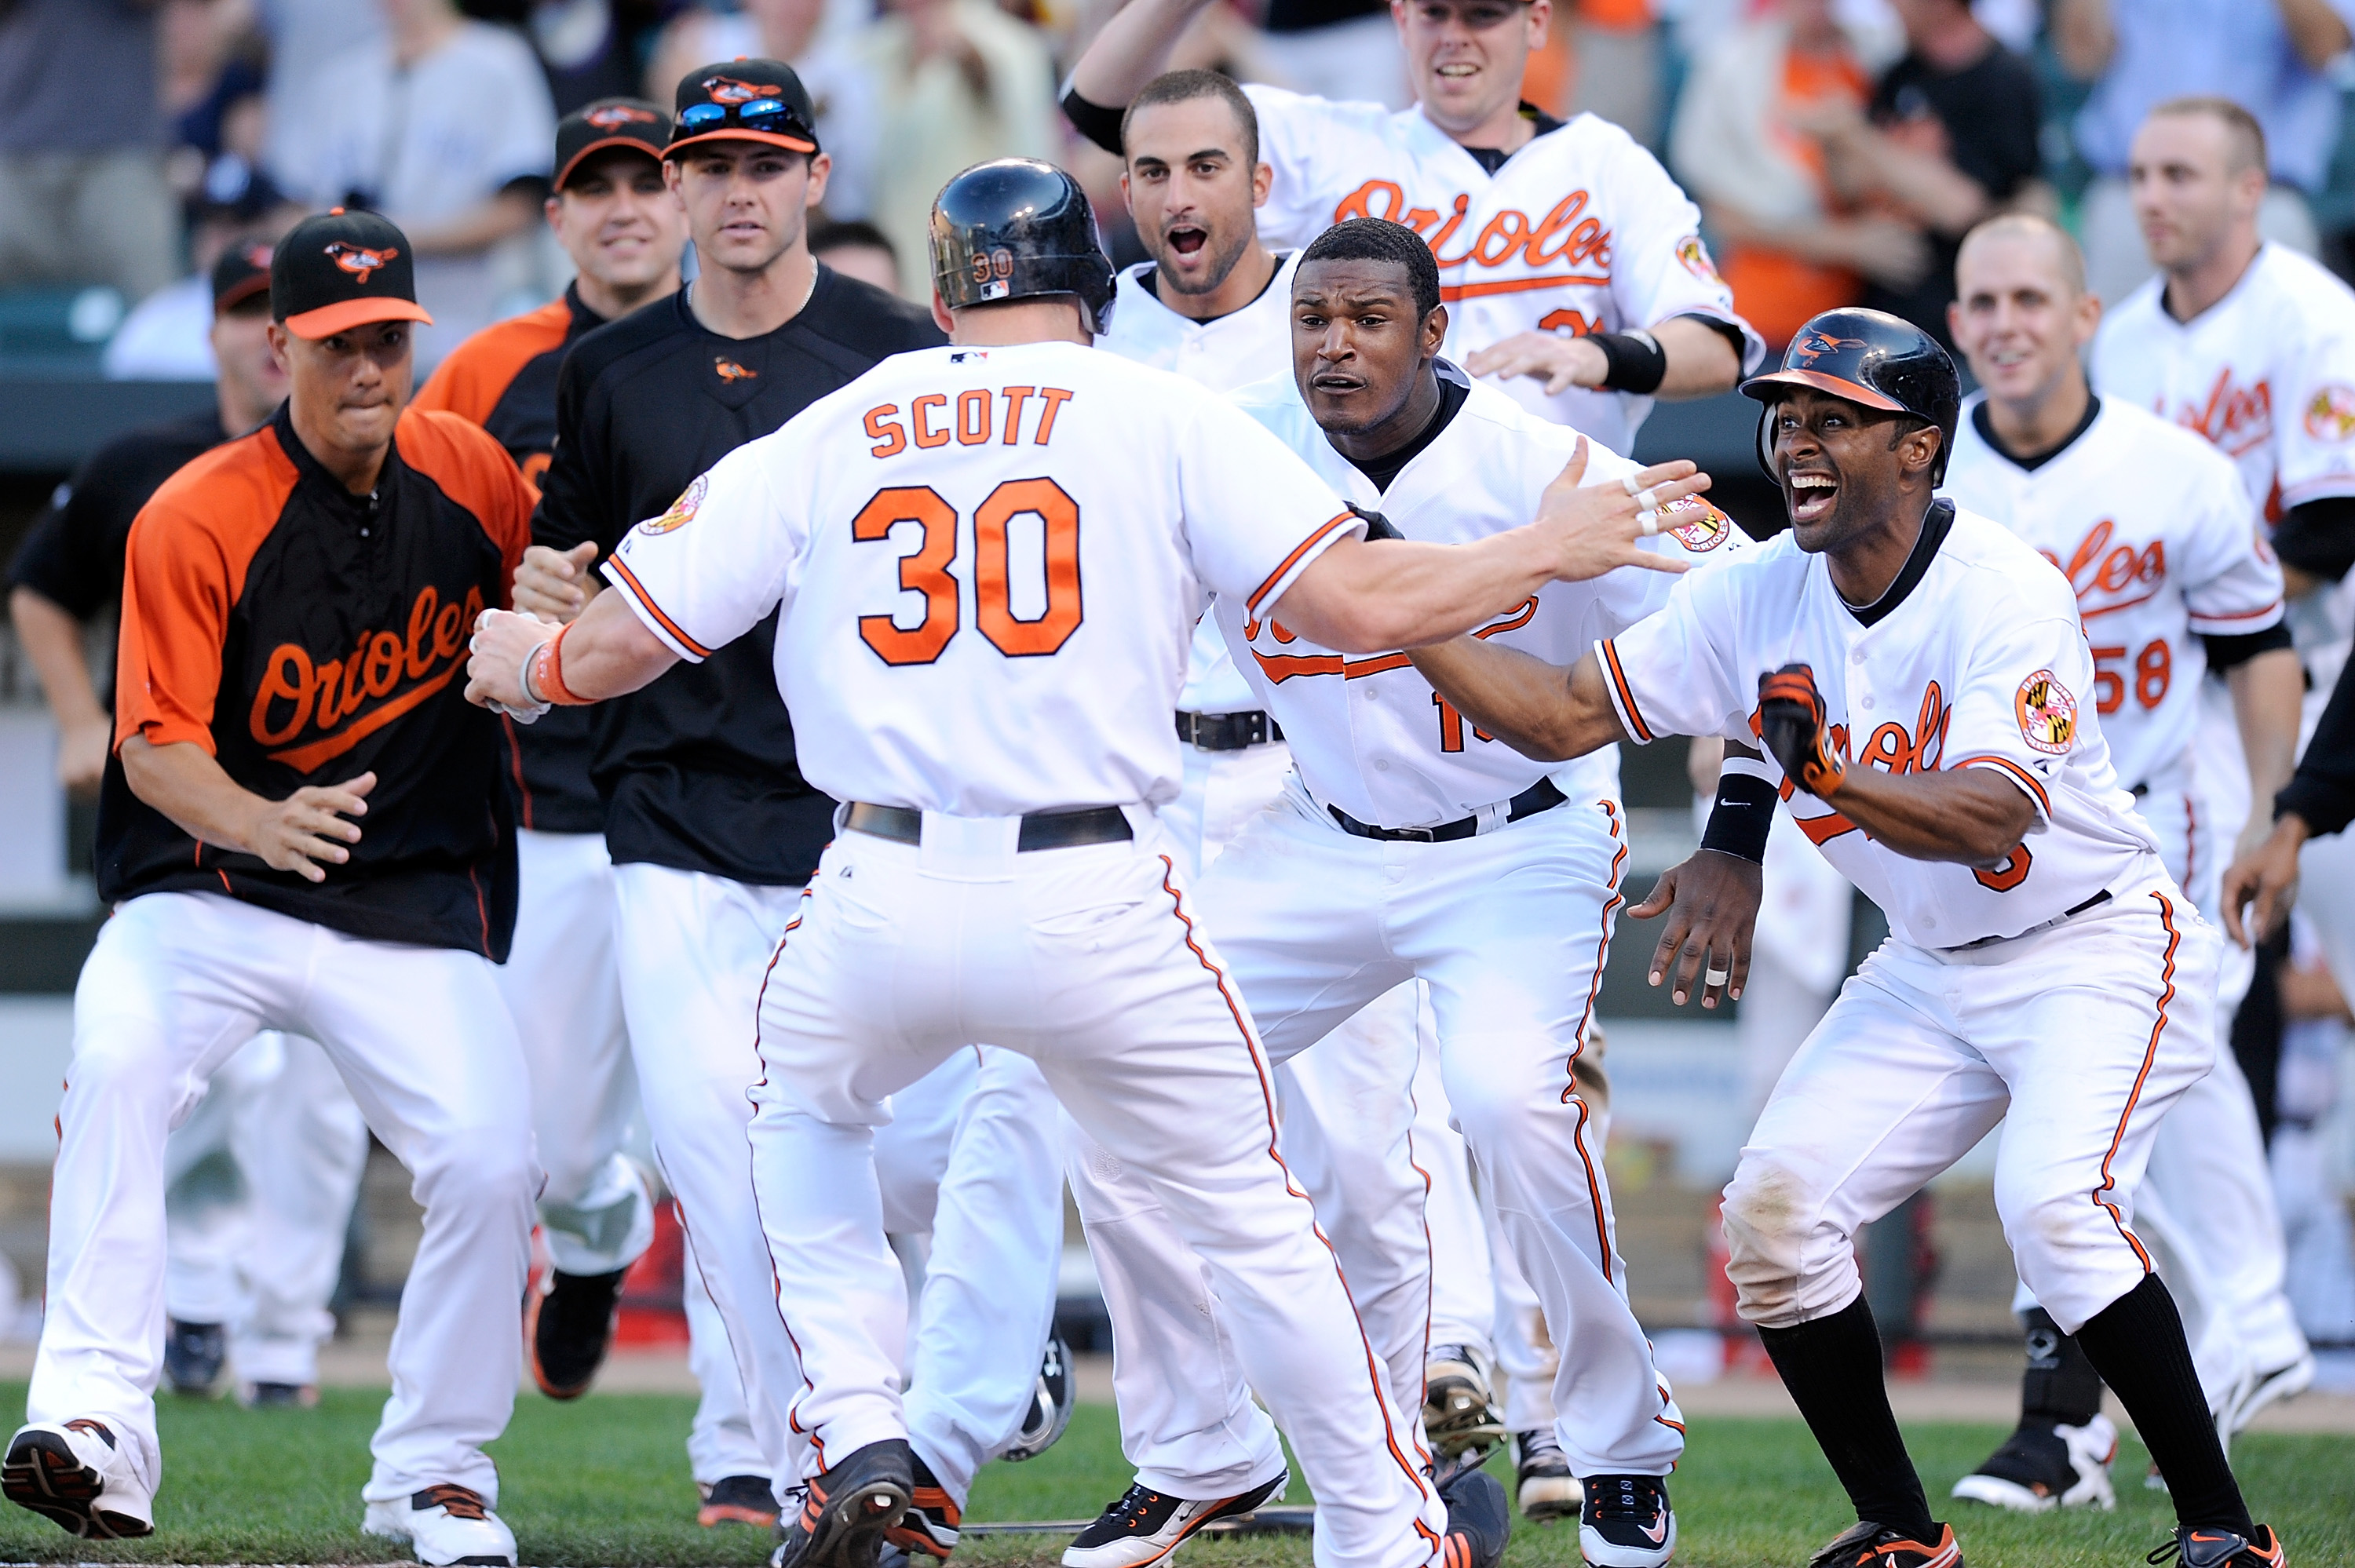 HOT START: Milwaukee's J.J. Hardy is congratulated by teammate Corey Hart  after scoring the game winning